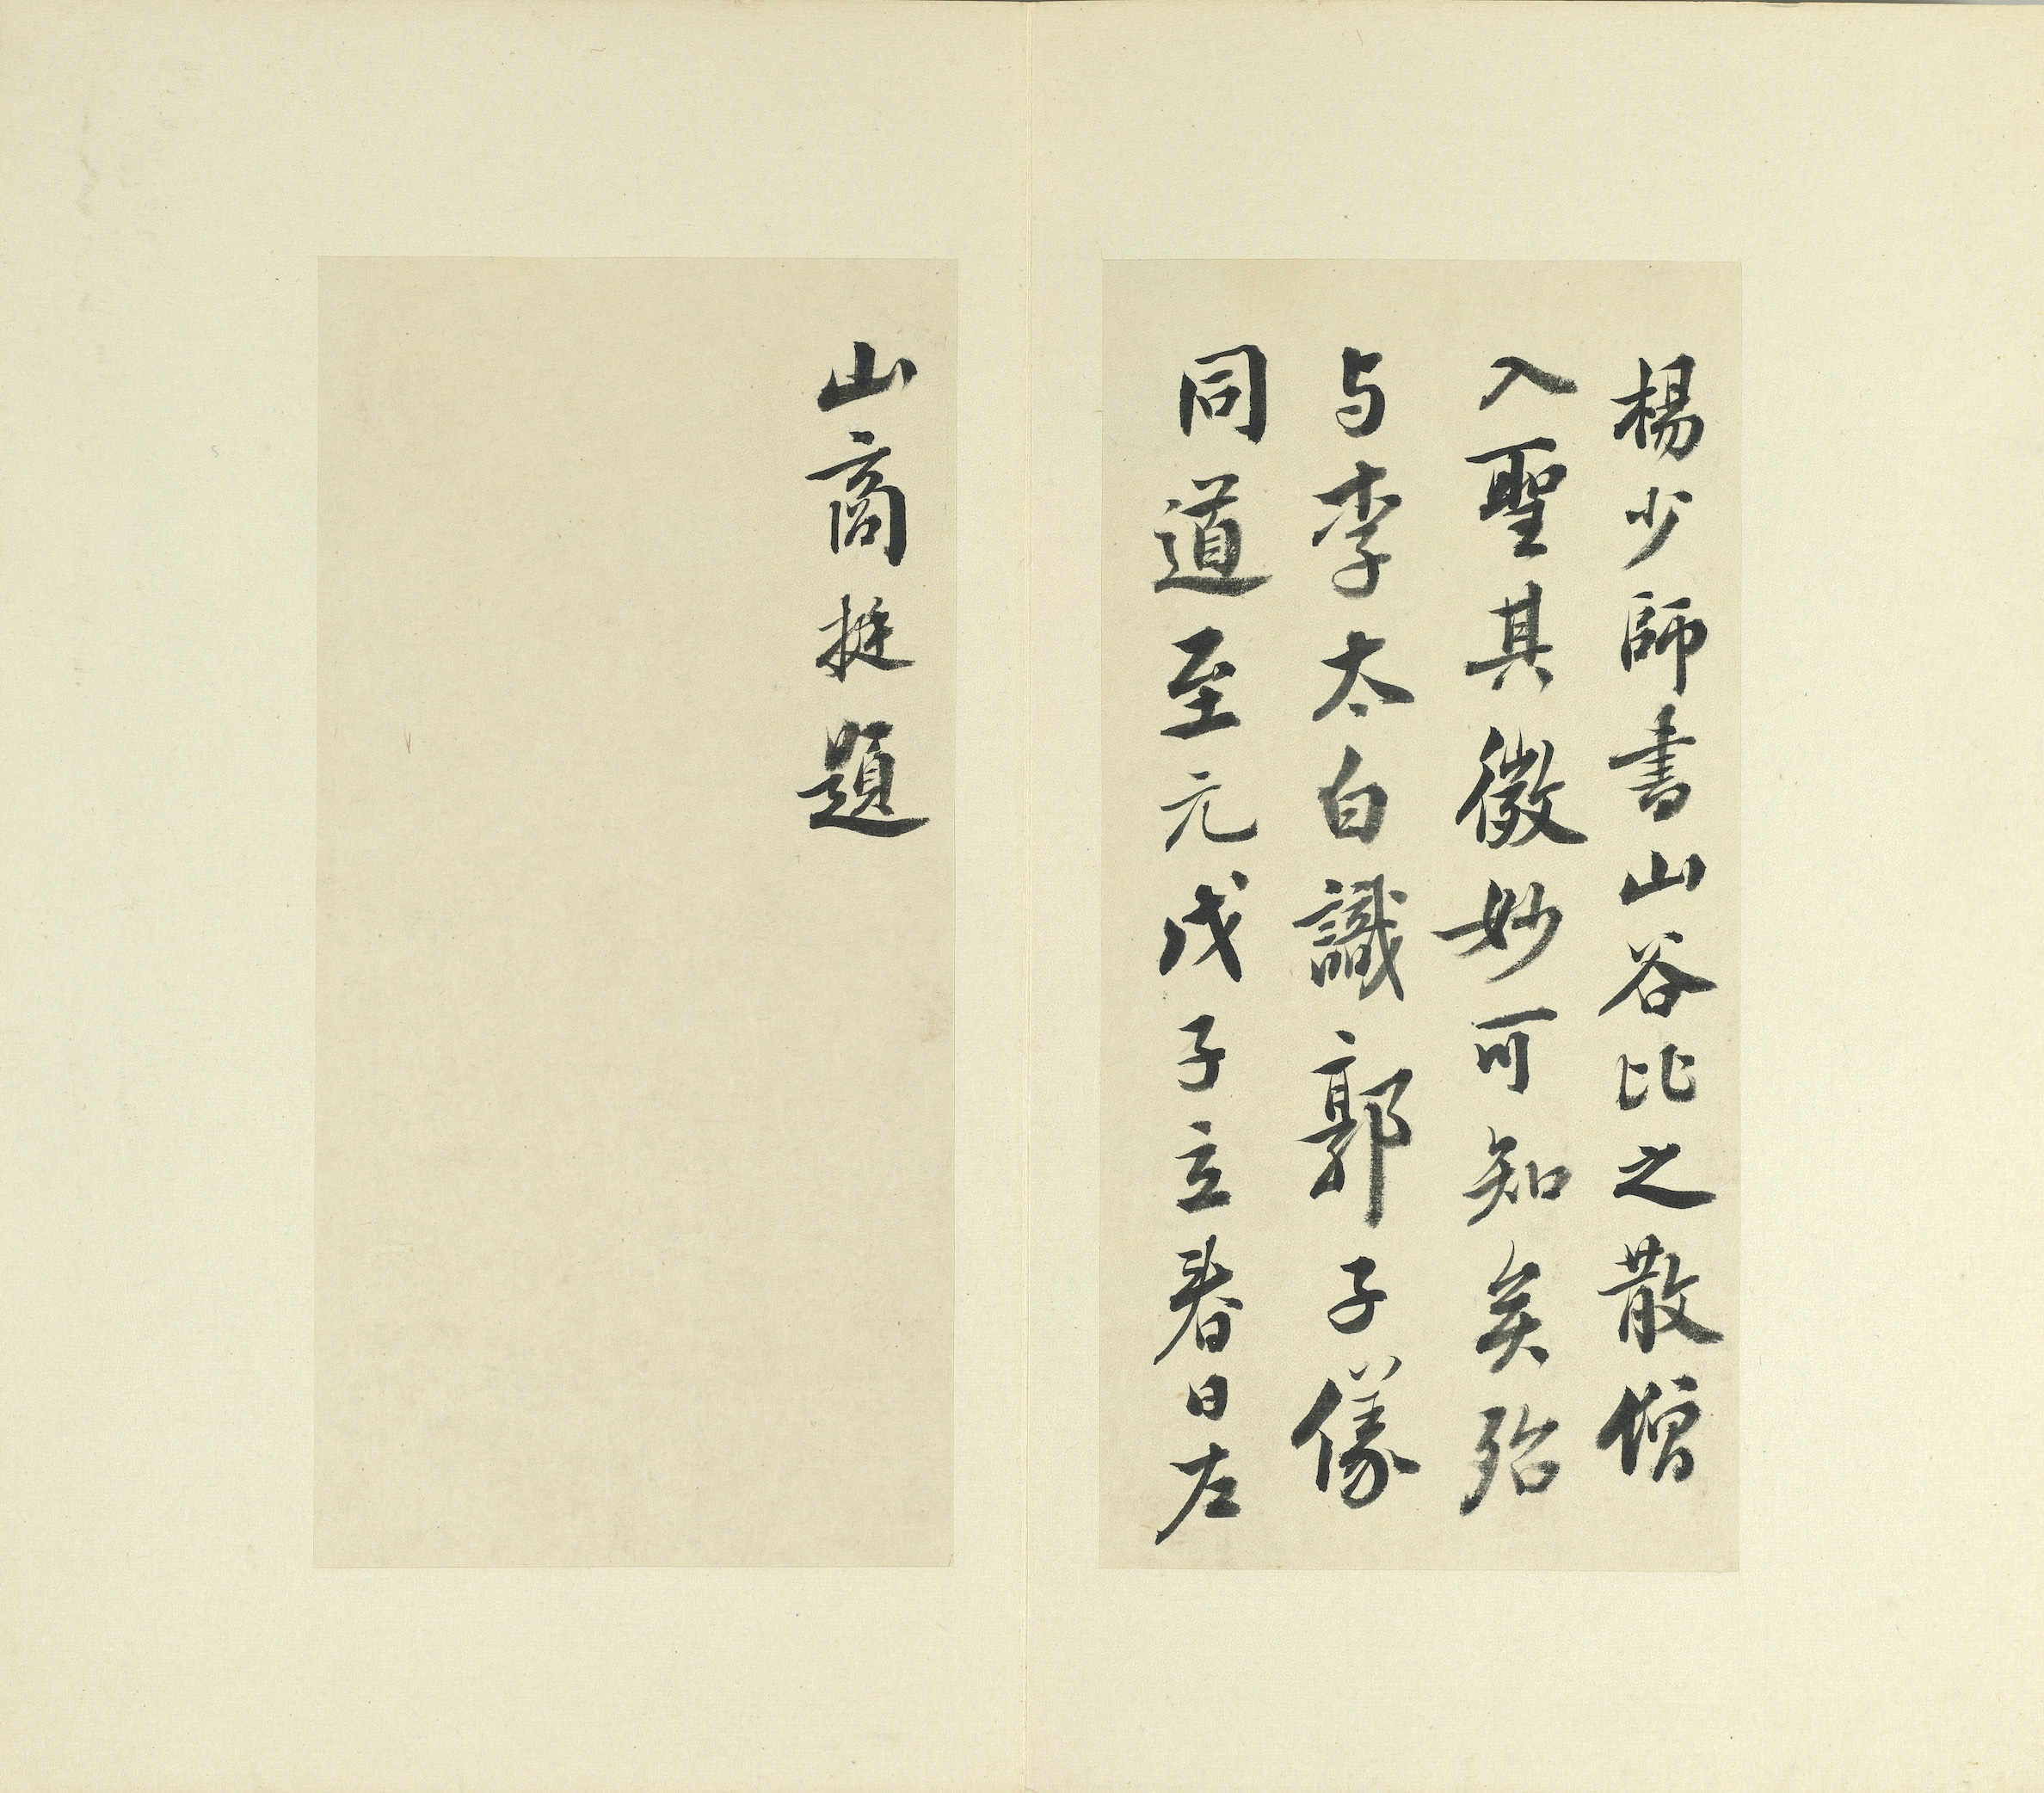 Copy of Yang Ningshi's "Methods of the Immortals for Daily Life"